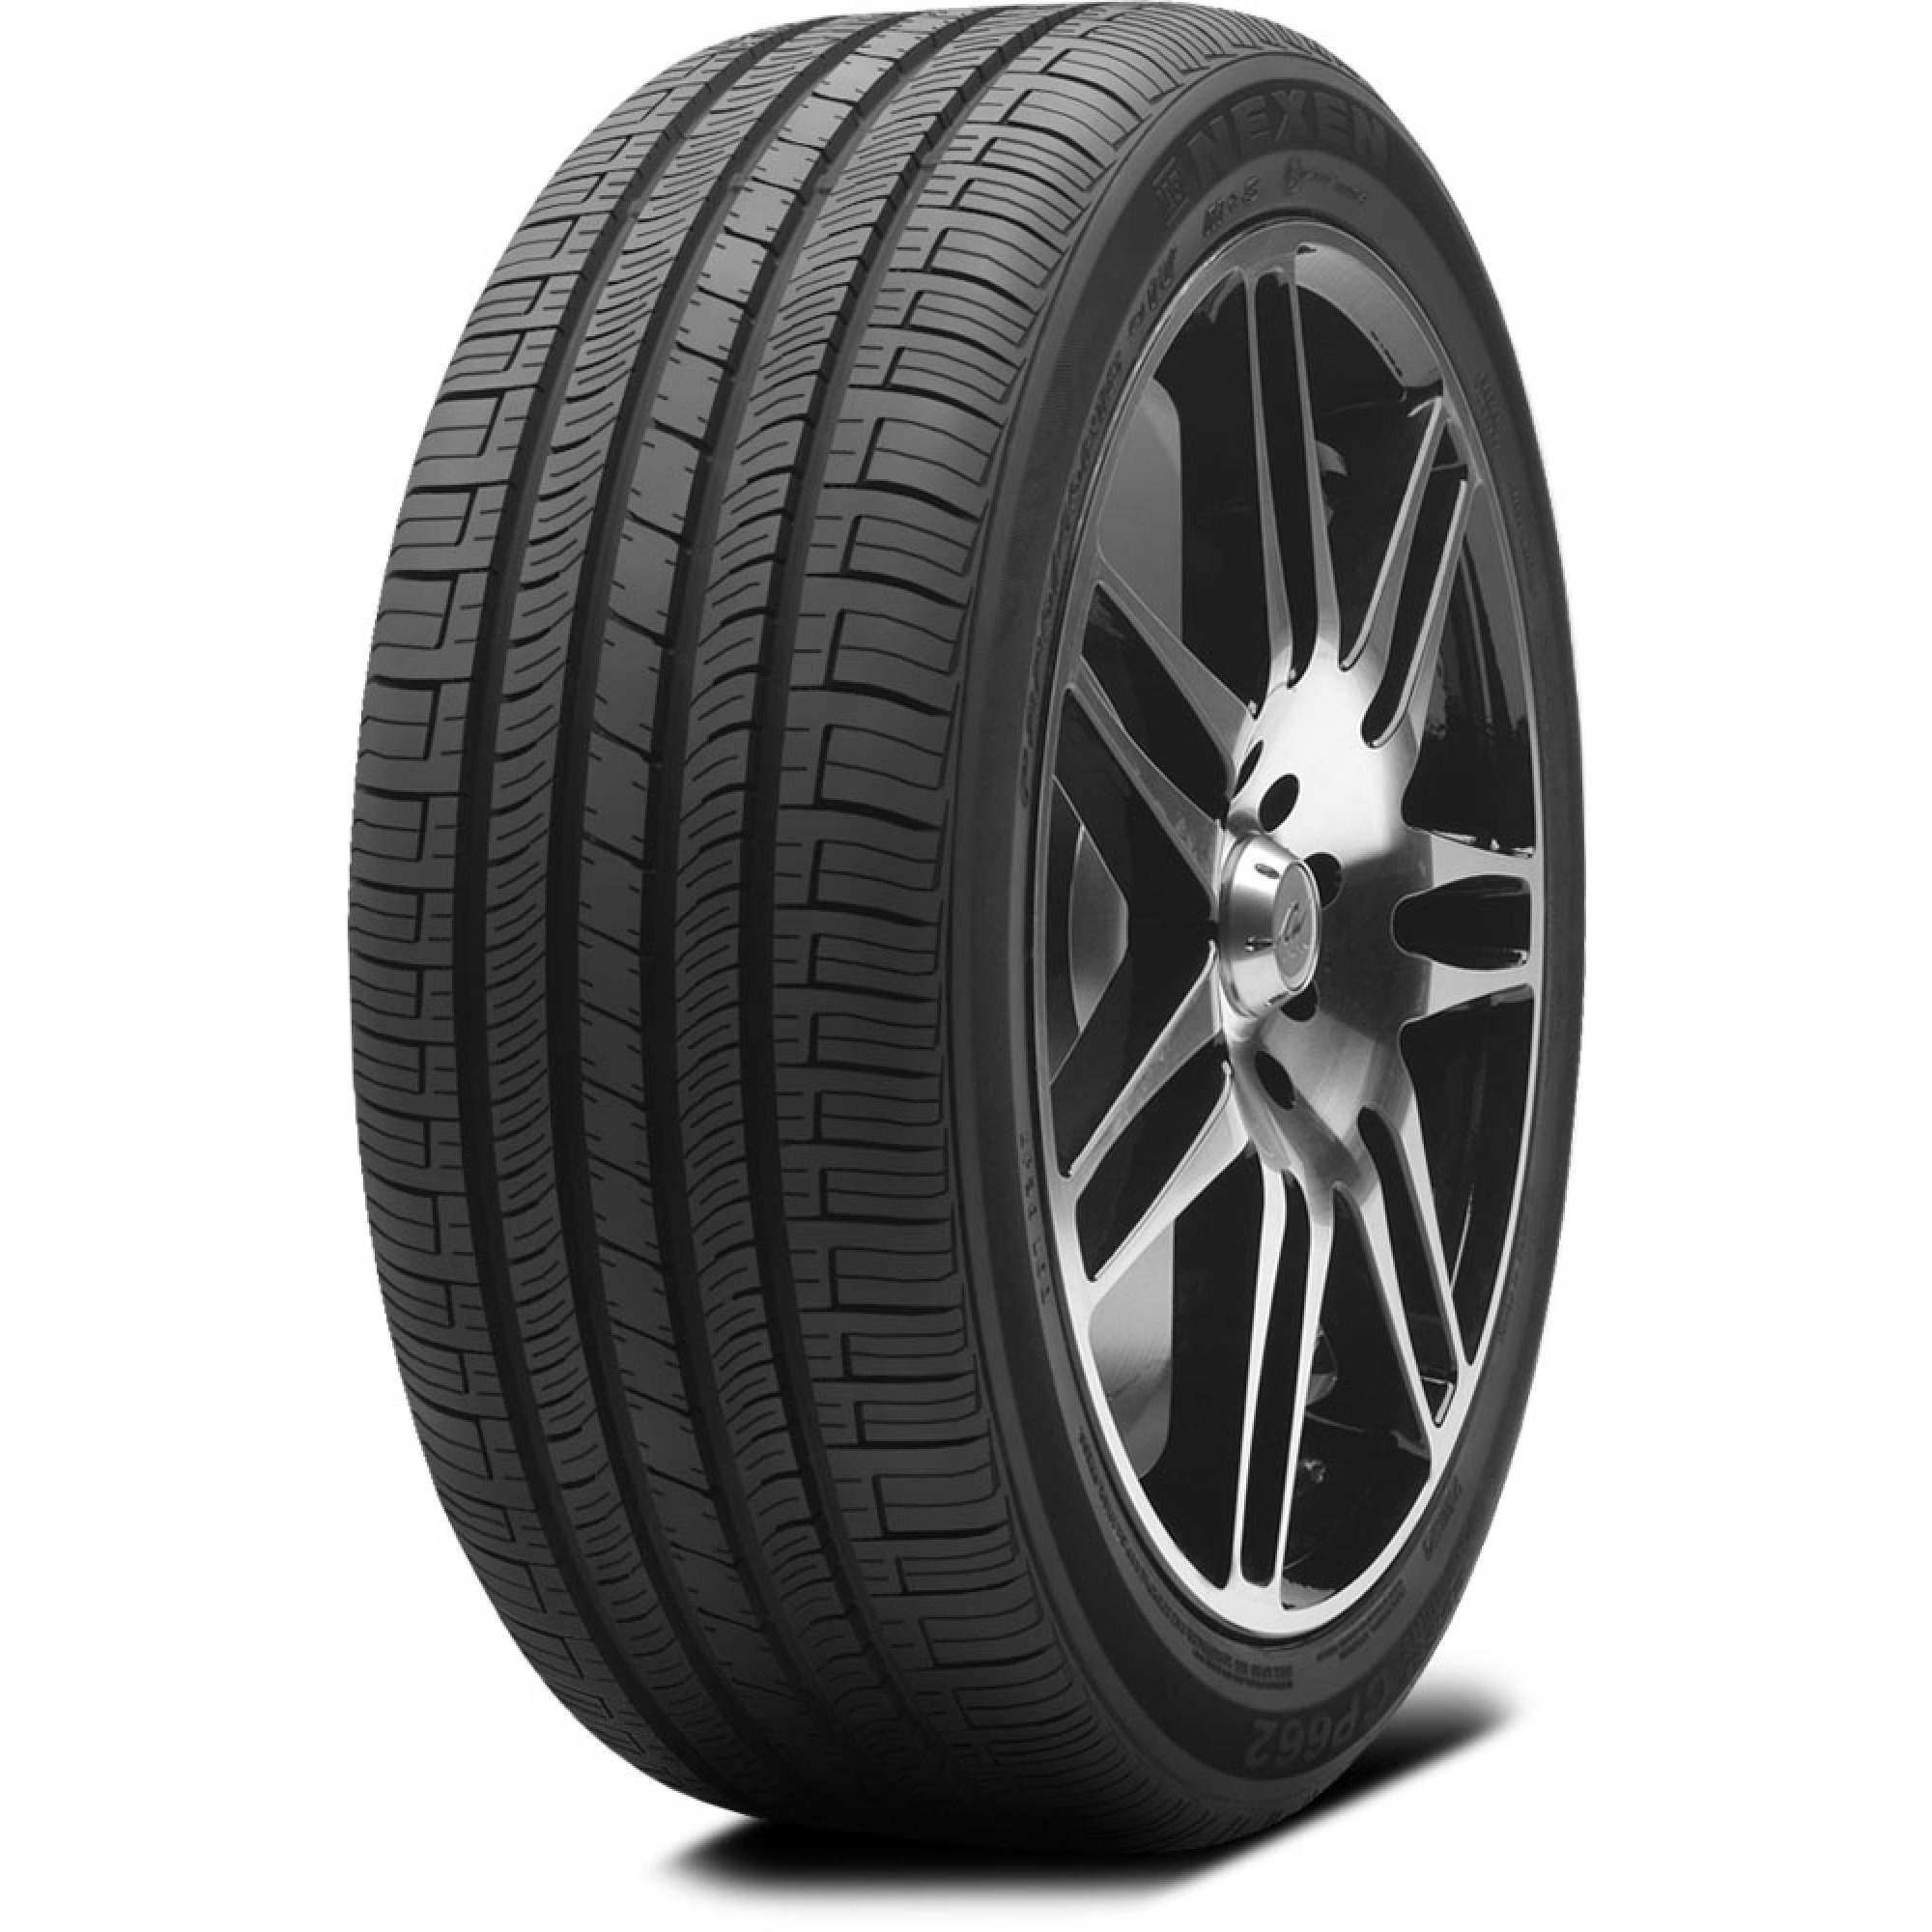 What do reviews typically say about Goodride tires?